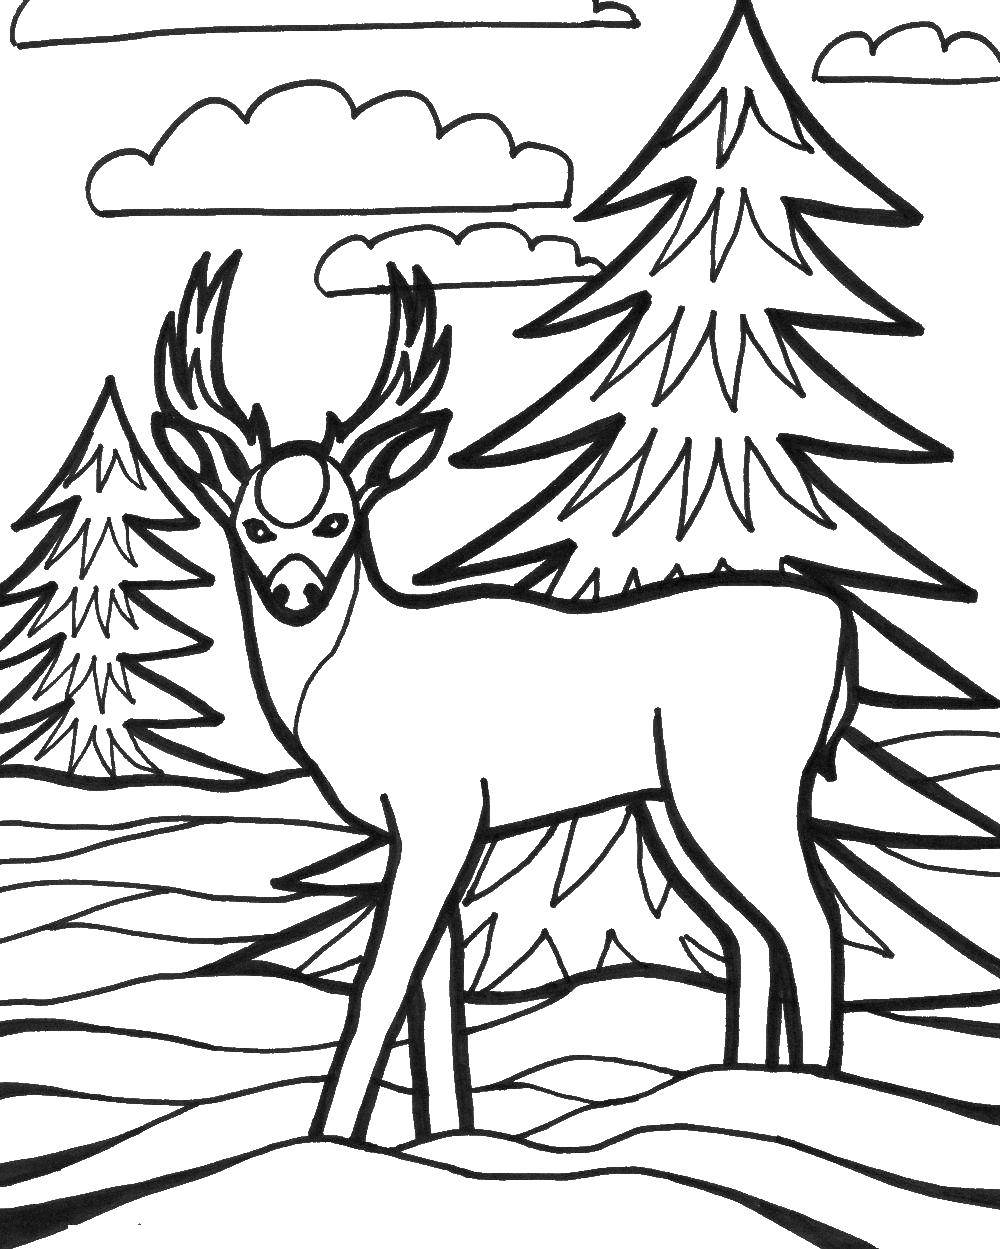 Coloring Deer in the forest. Category Wild animals. Tags:  deer , deer, forest, trees.